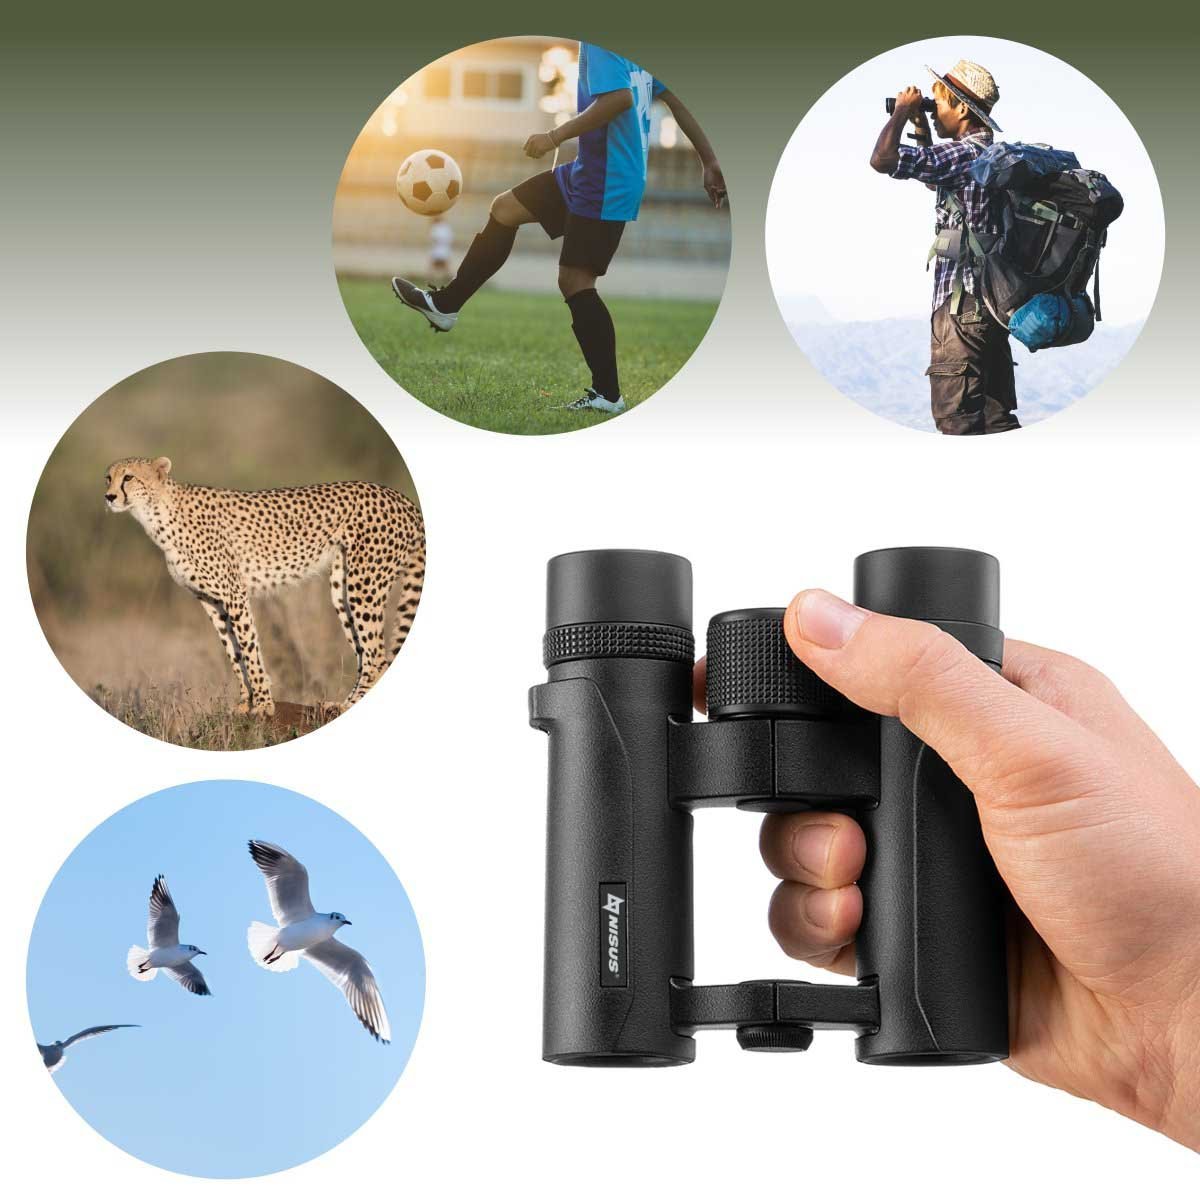 8x26 Compact Folding Binoculars with a Travel Case could be used to explore the distant world around you